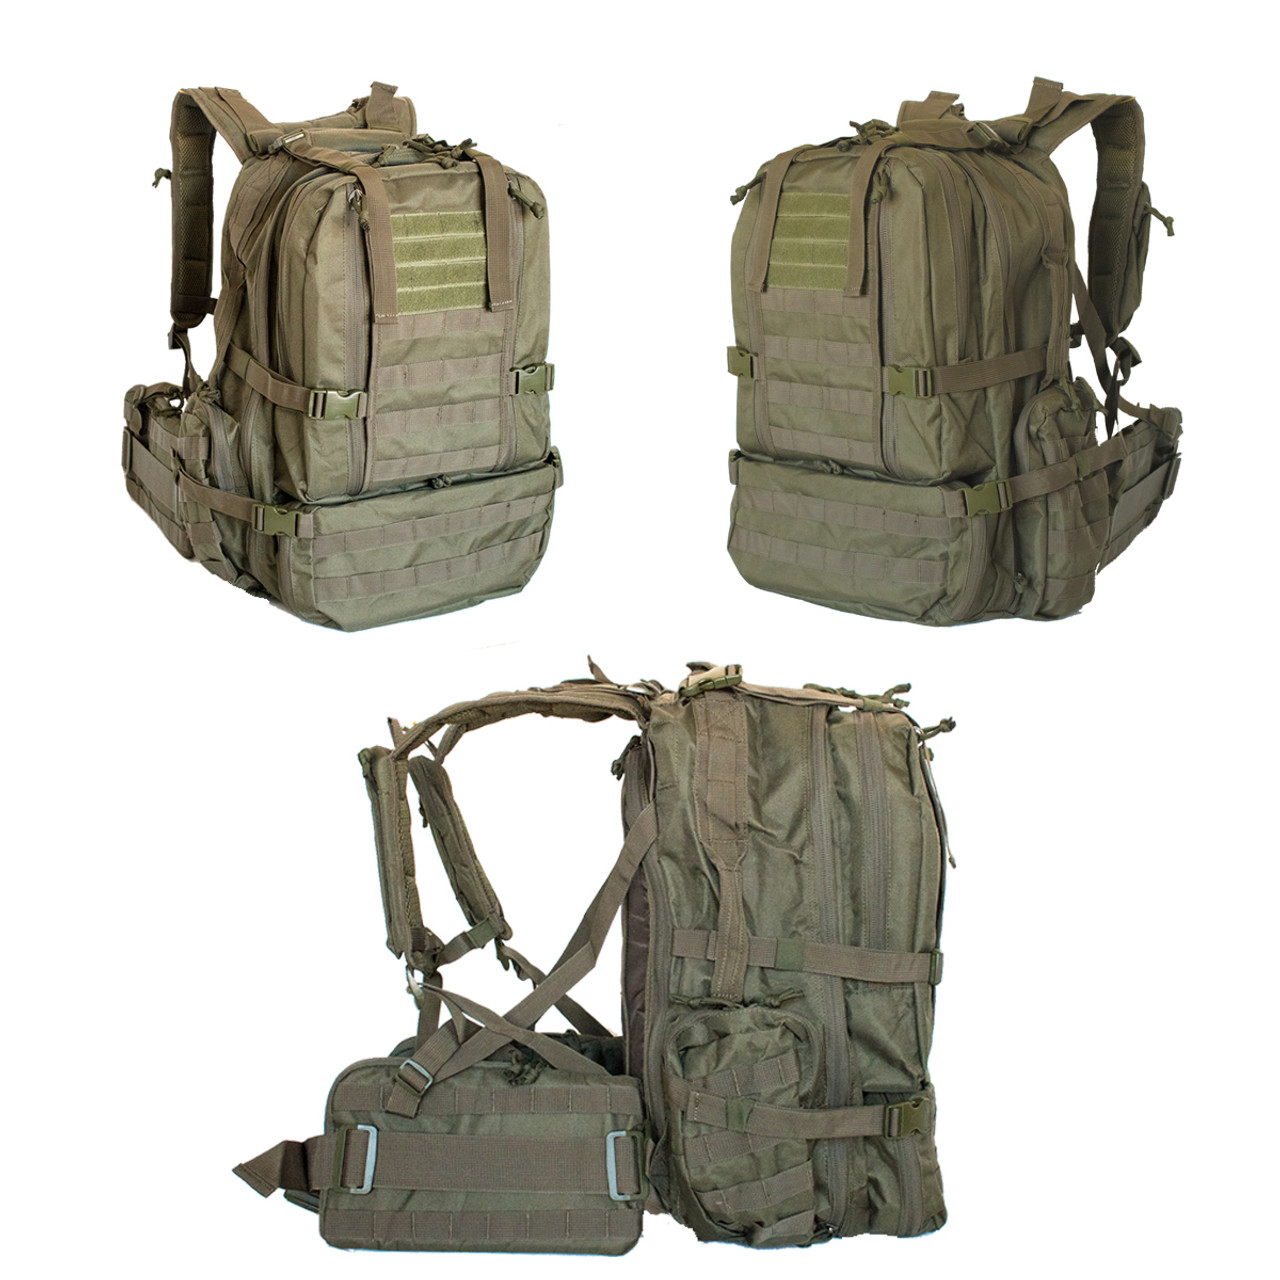 EXPLORER Coyote Tan Tactical 3 Day Military Tactical Combat Assault Pack  Molle Bug Out Bag Backpack for Outdoor Hiking Camping Trekking Hunting -  Explorer Bags